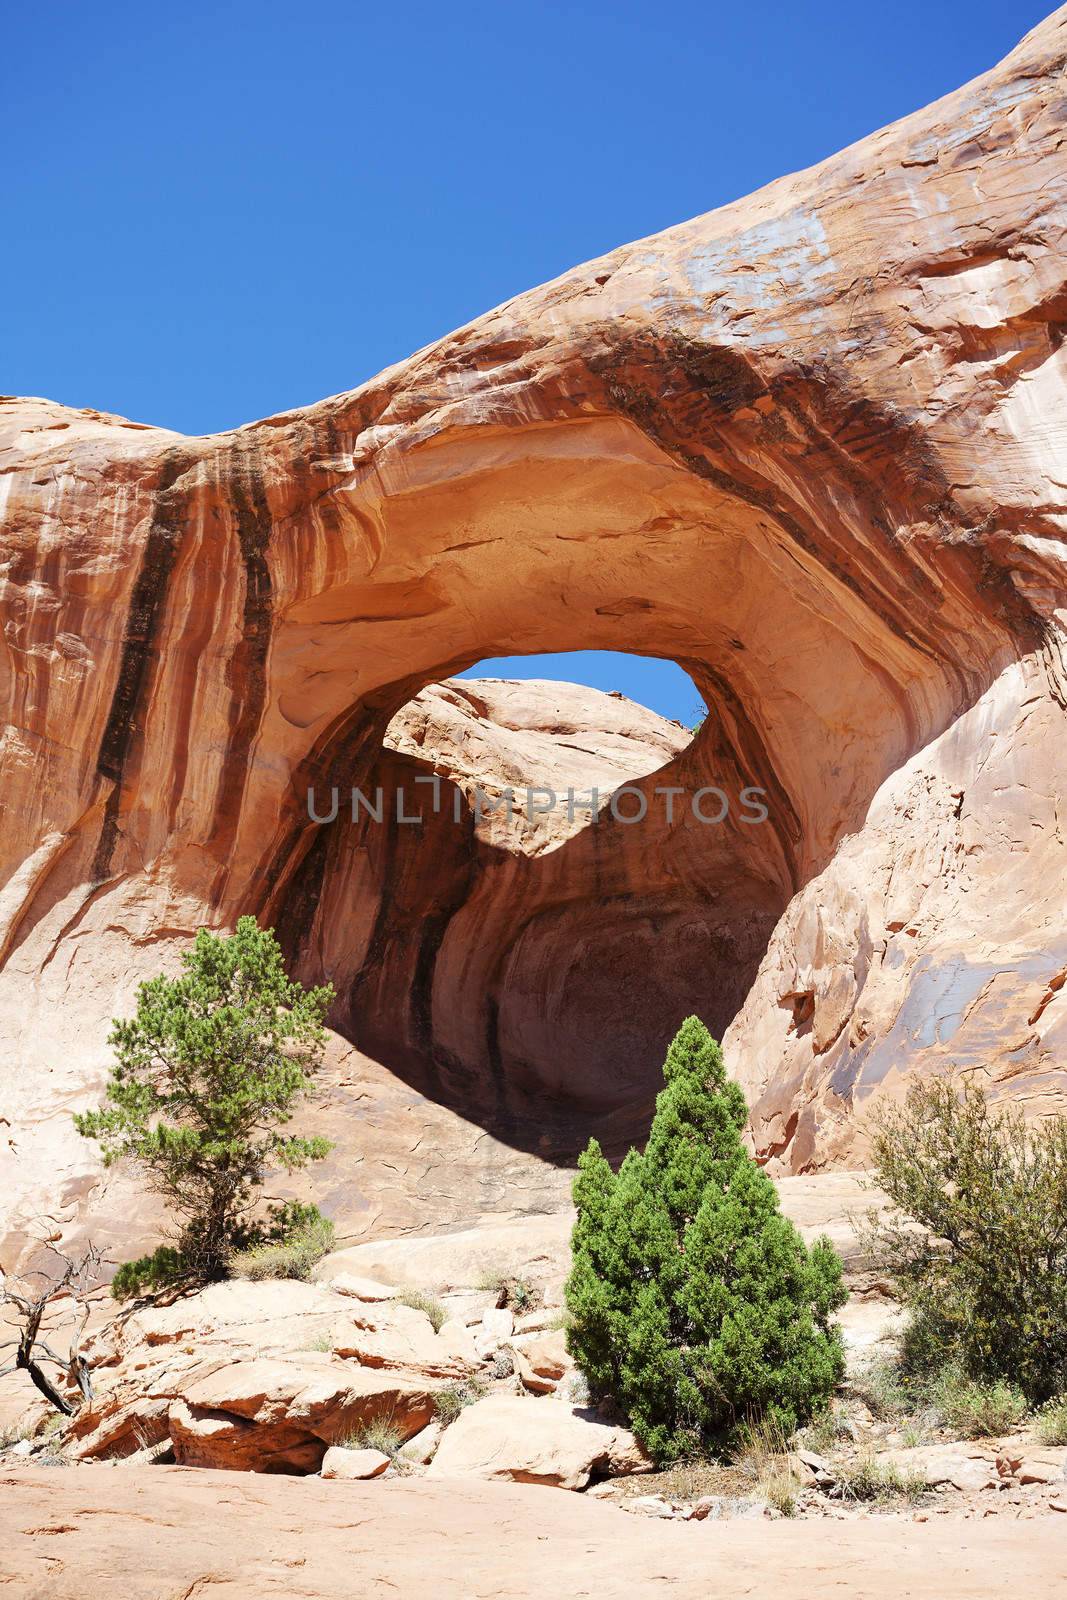 Bowtie Arch, arch formed when a pothole broke through from the top of the cliff